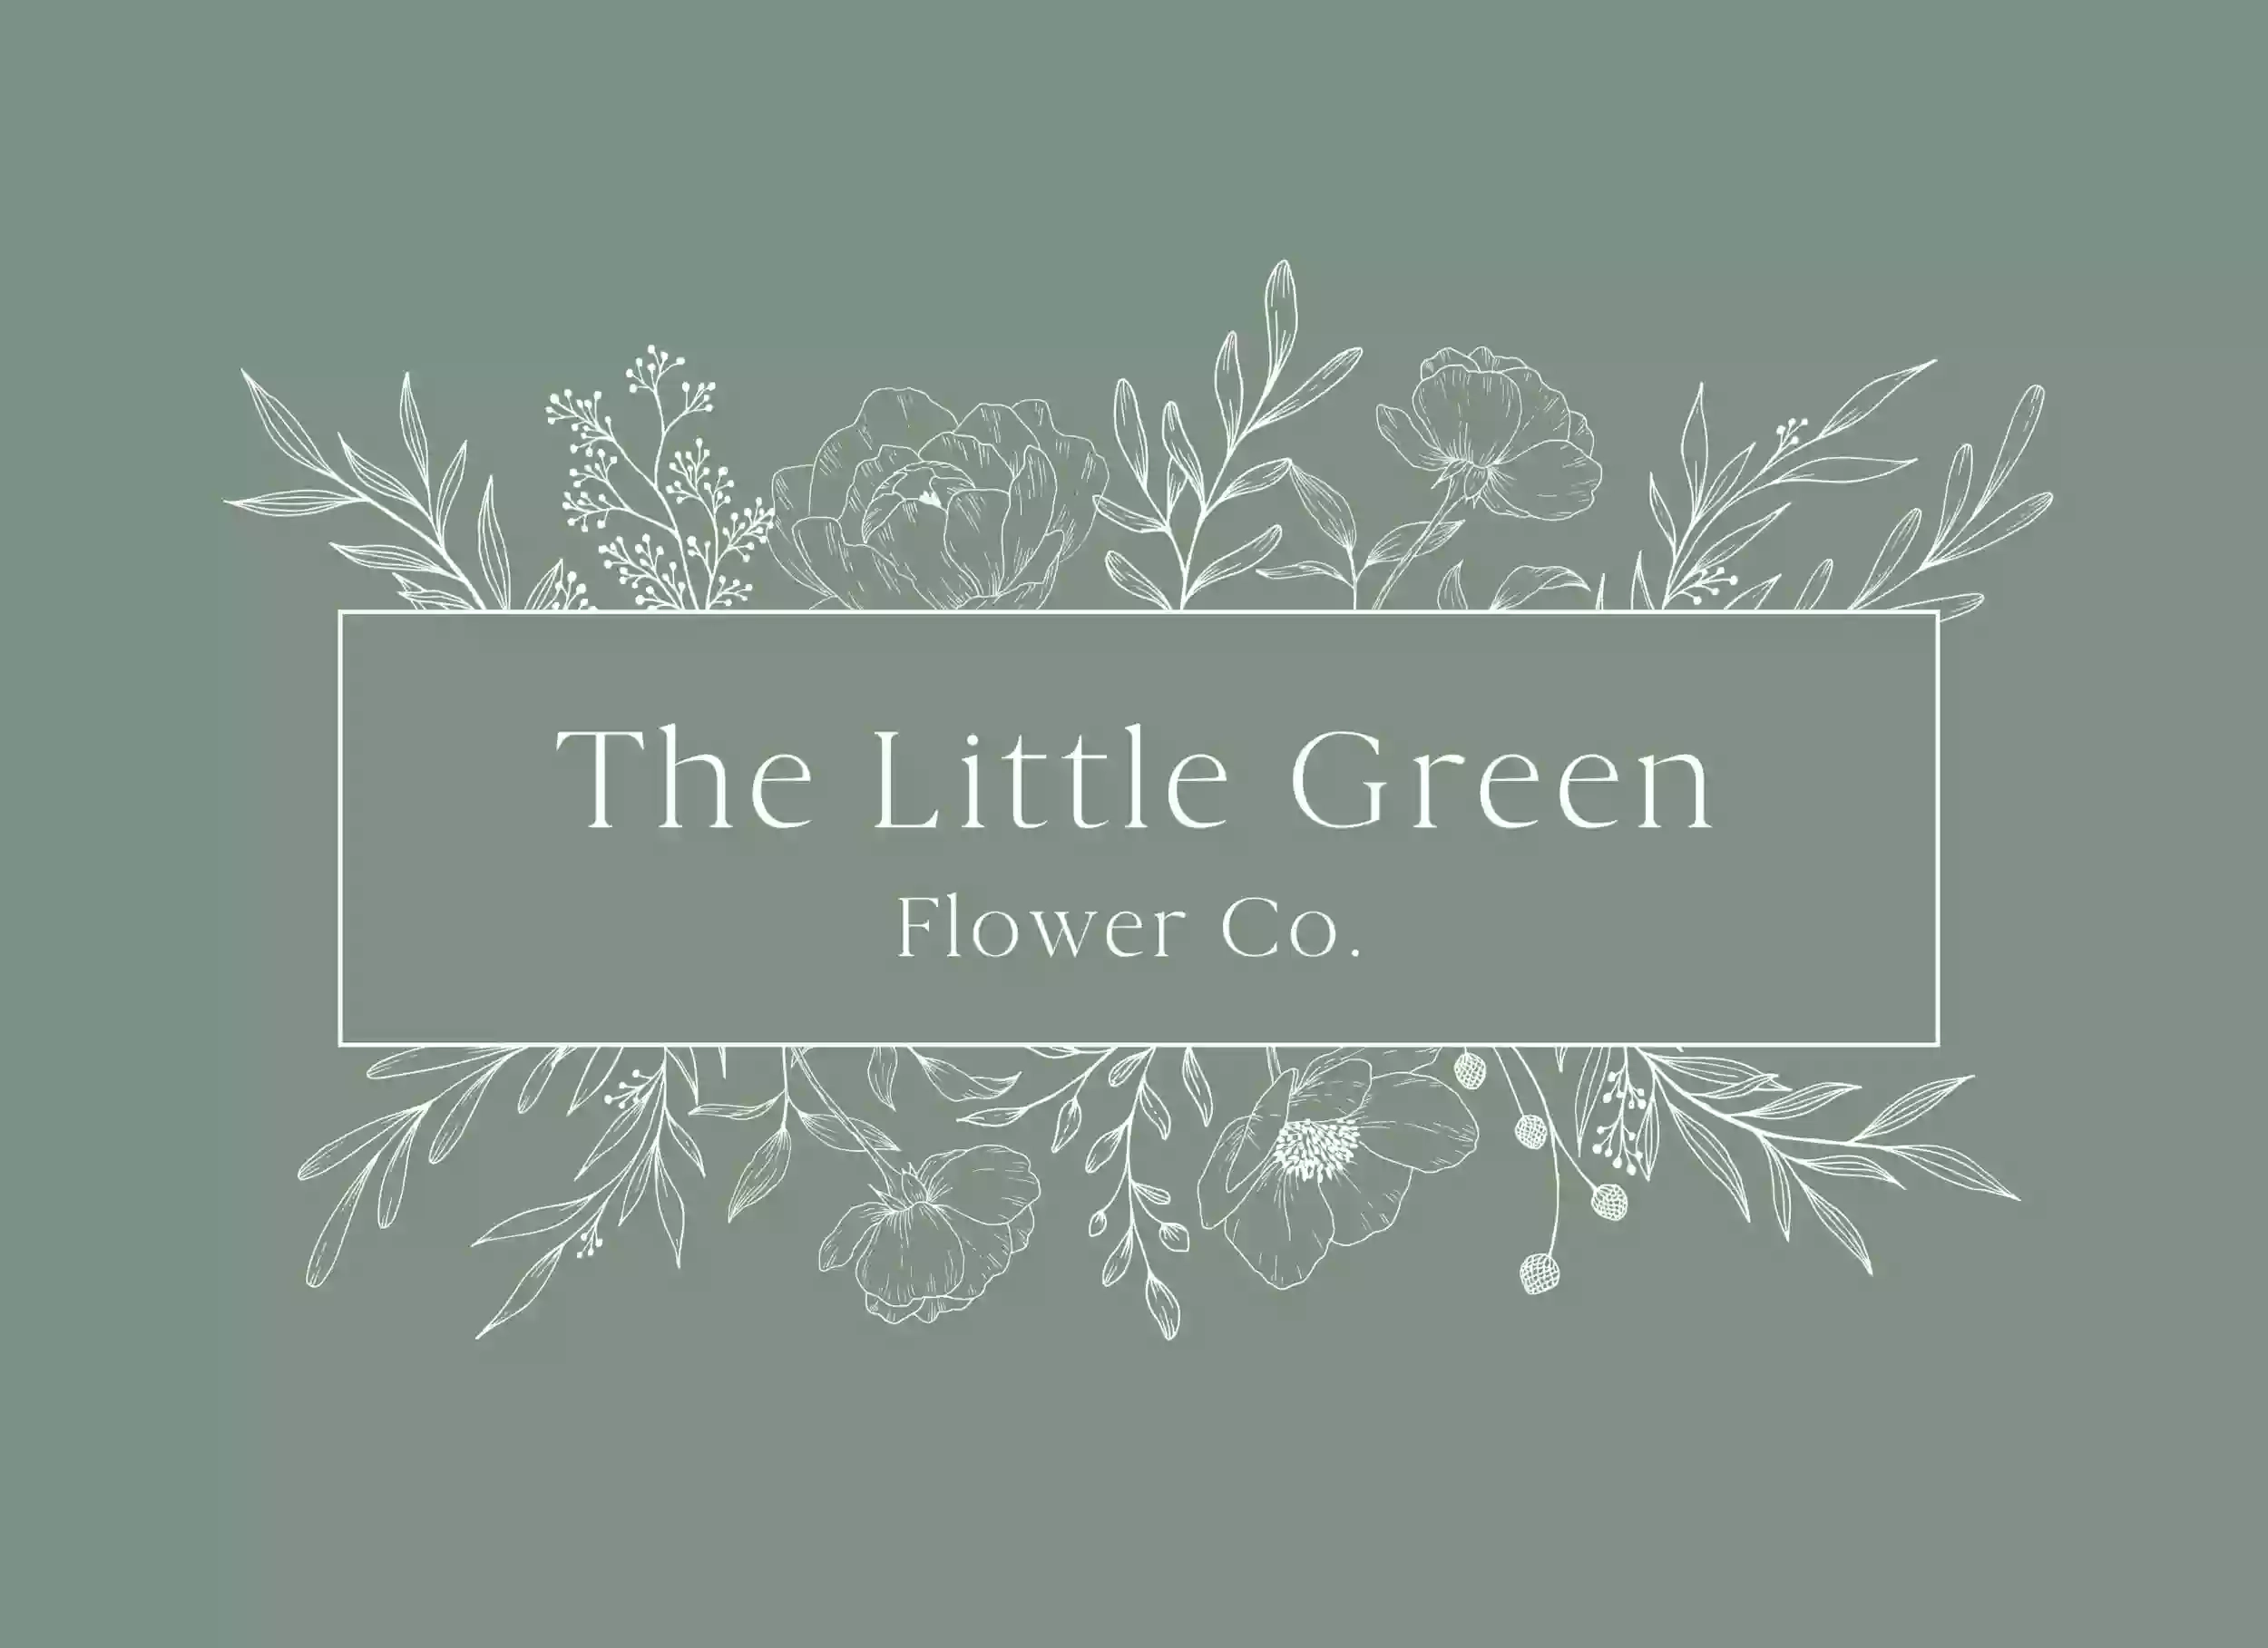 The Little Green Flower Company